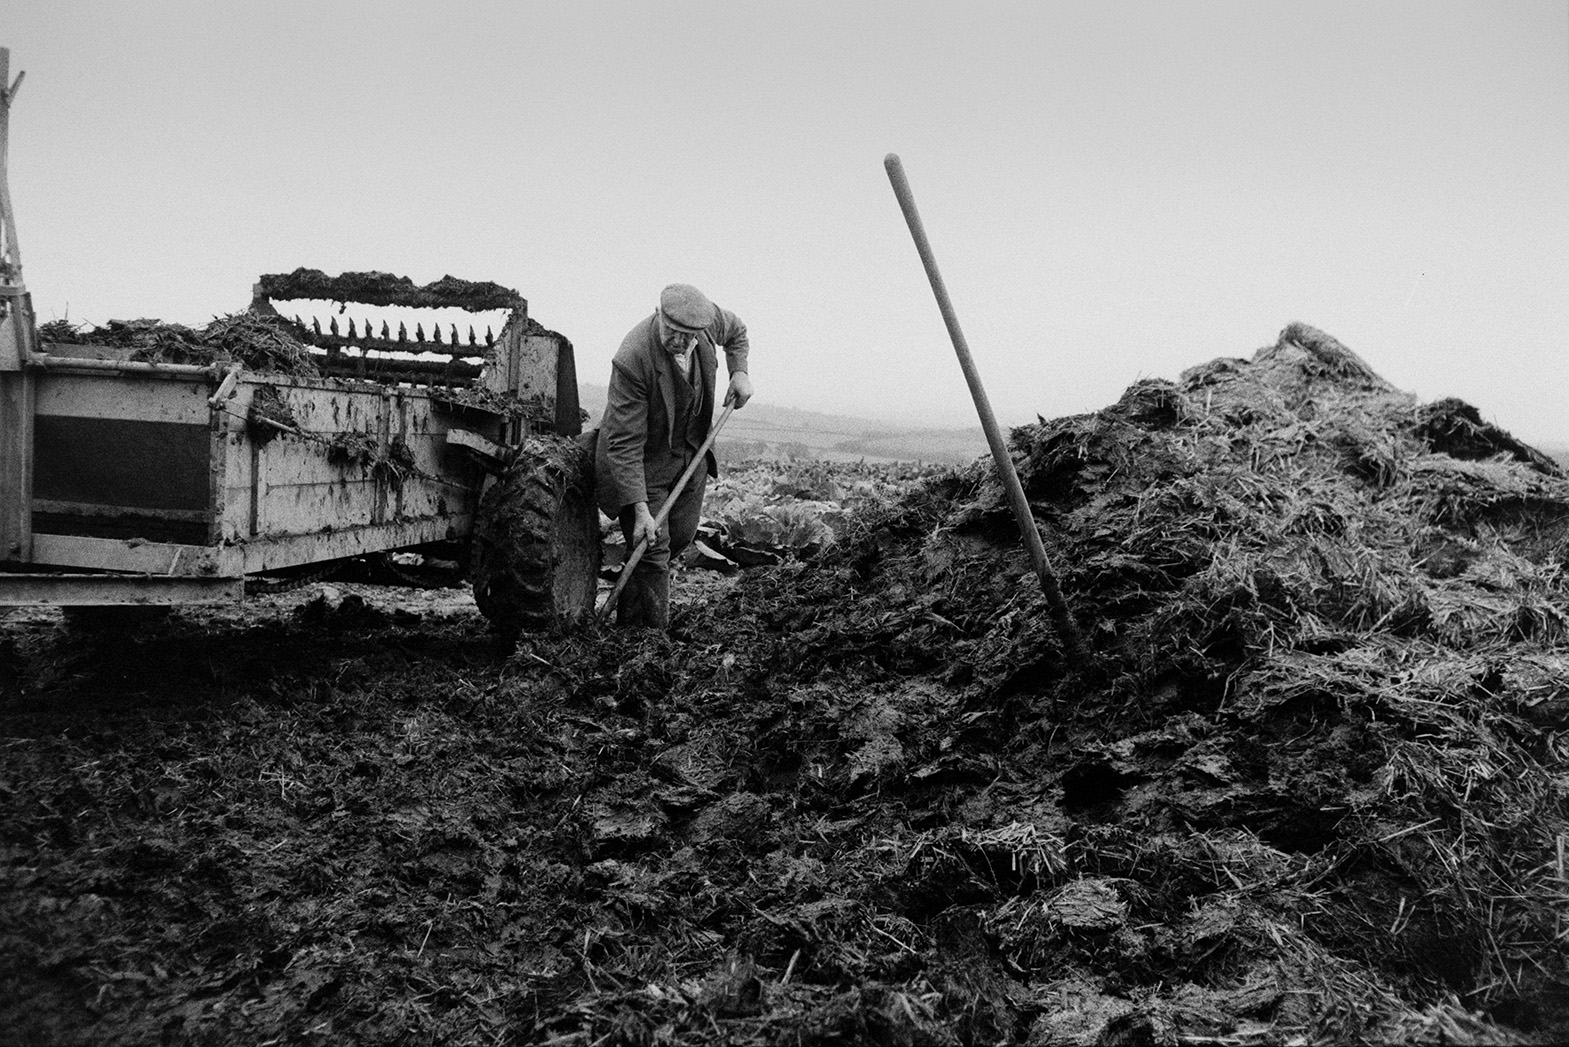 Tom Hooper loading a muck spreader with manure from a muck heap or dung heap in a field at Mill Road Farm, Beaford. He is using a shovel. The farm was also known as Jeffrys.